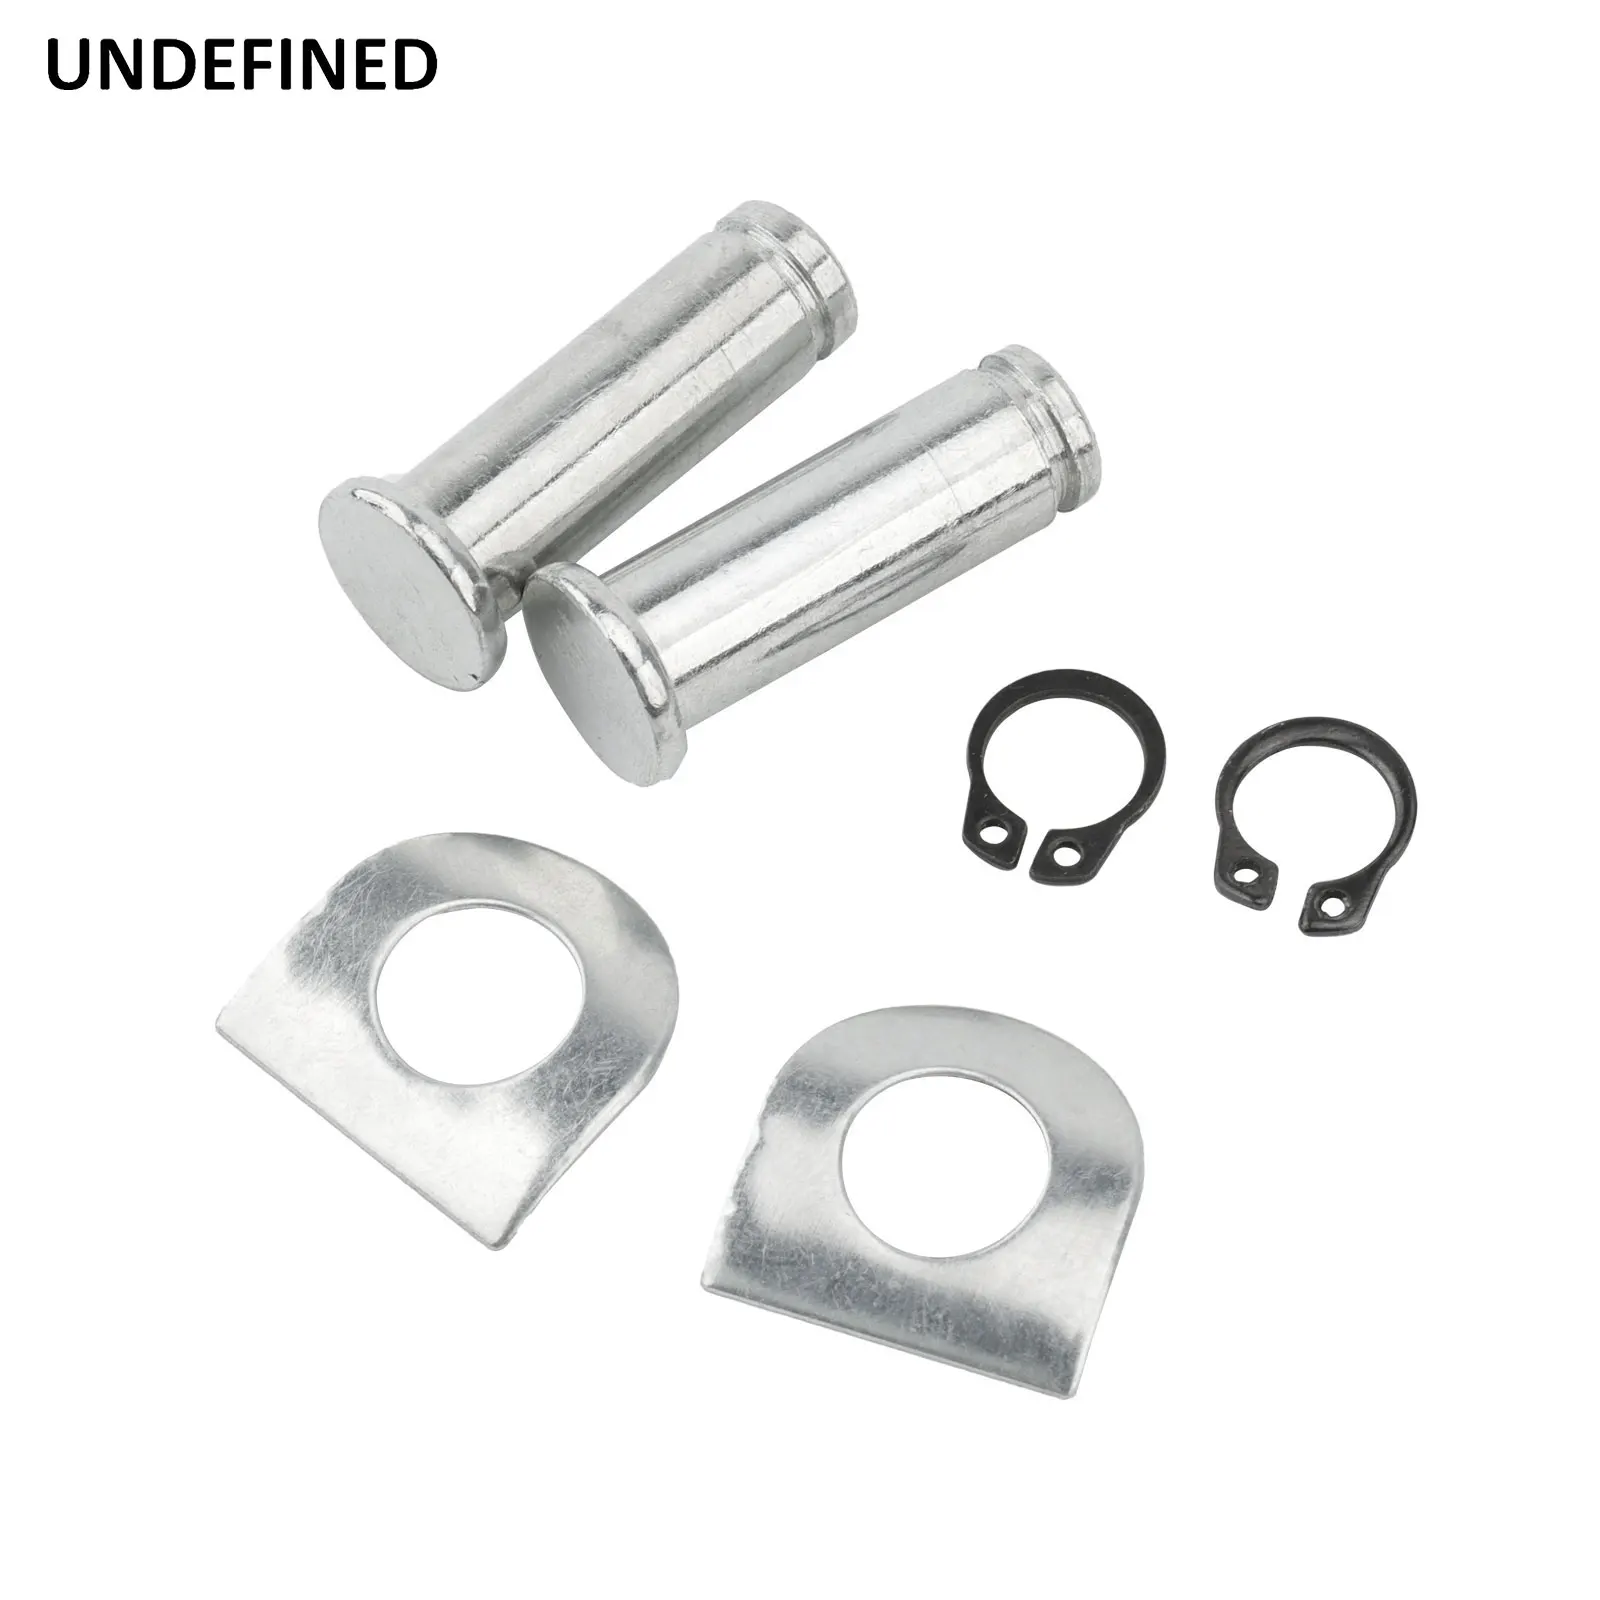 

Motorcycles Foot Pegs Mount Kit Pins For Harley Touring Sportster 1200 883 Forty Eight Seventy Two Heritage Softail Fat Boy Dyna